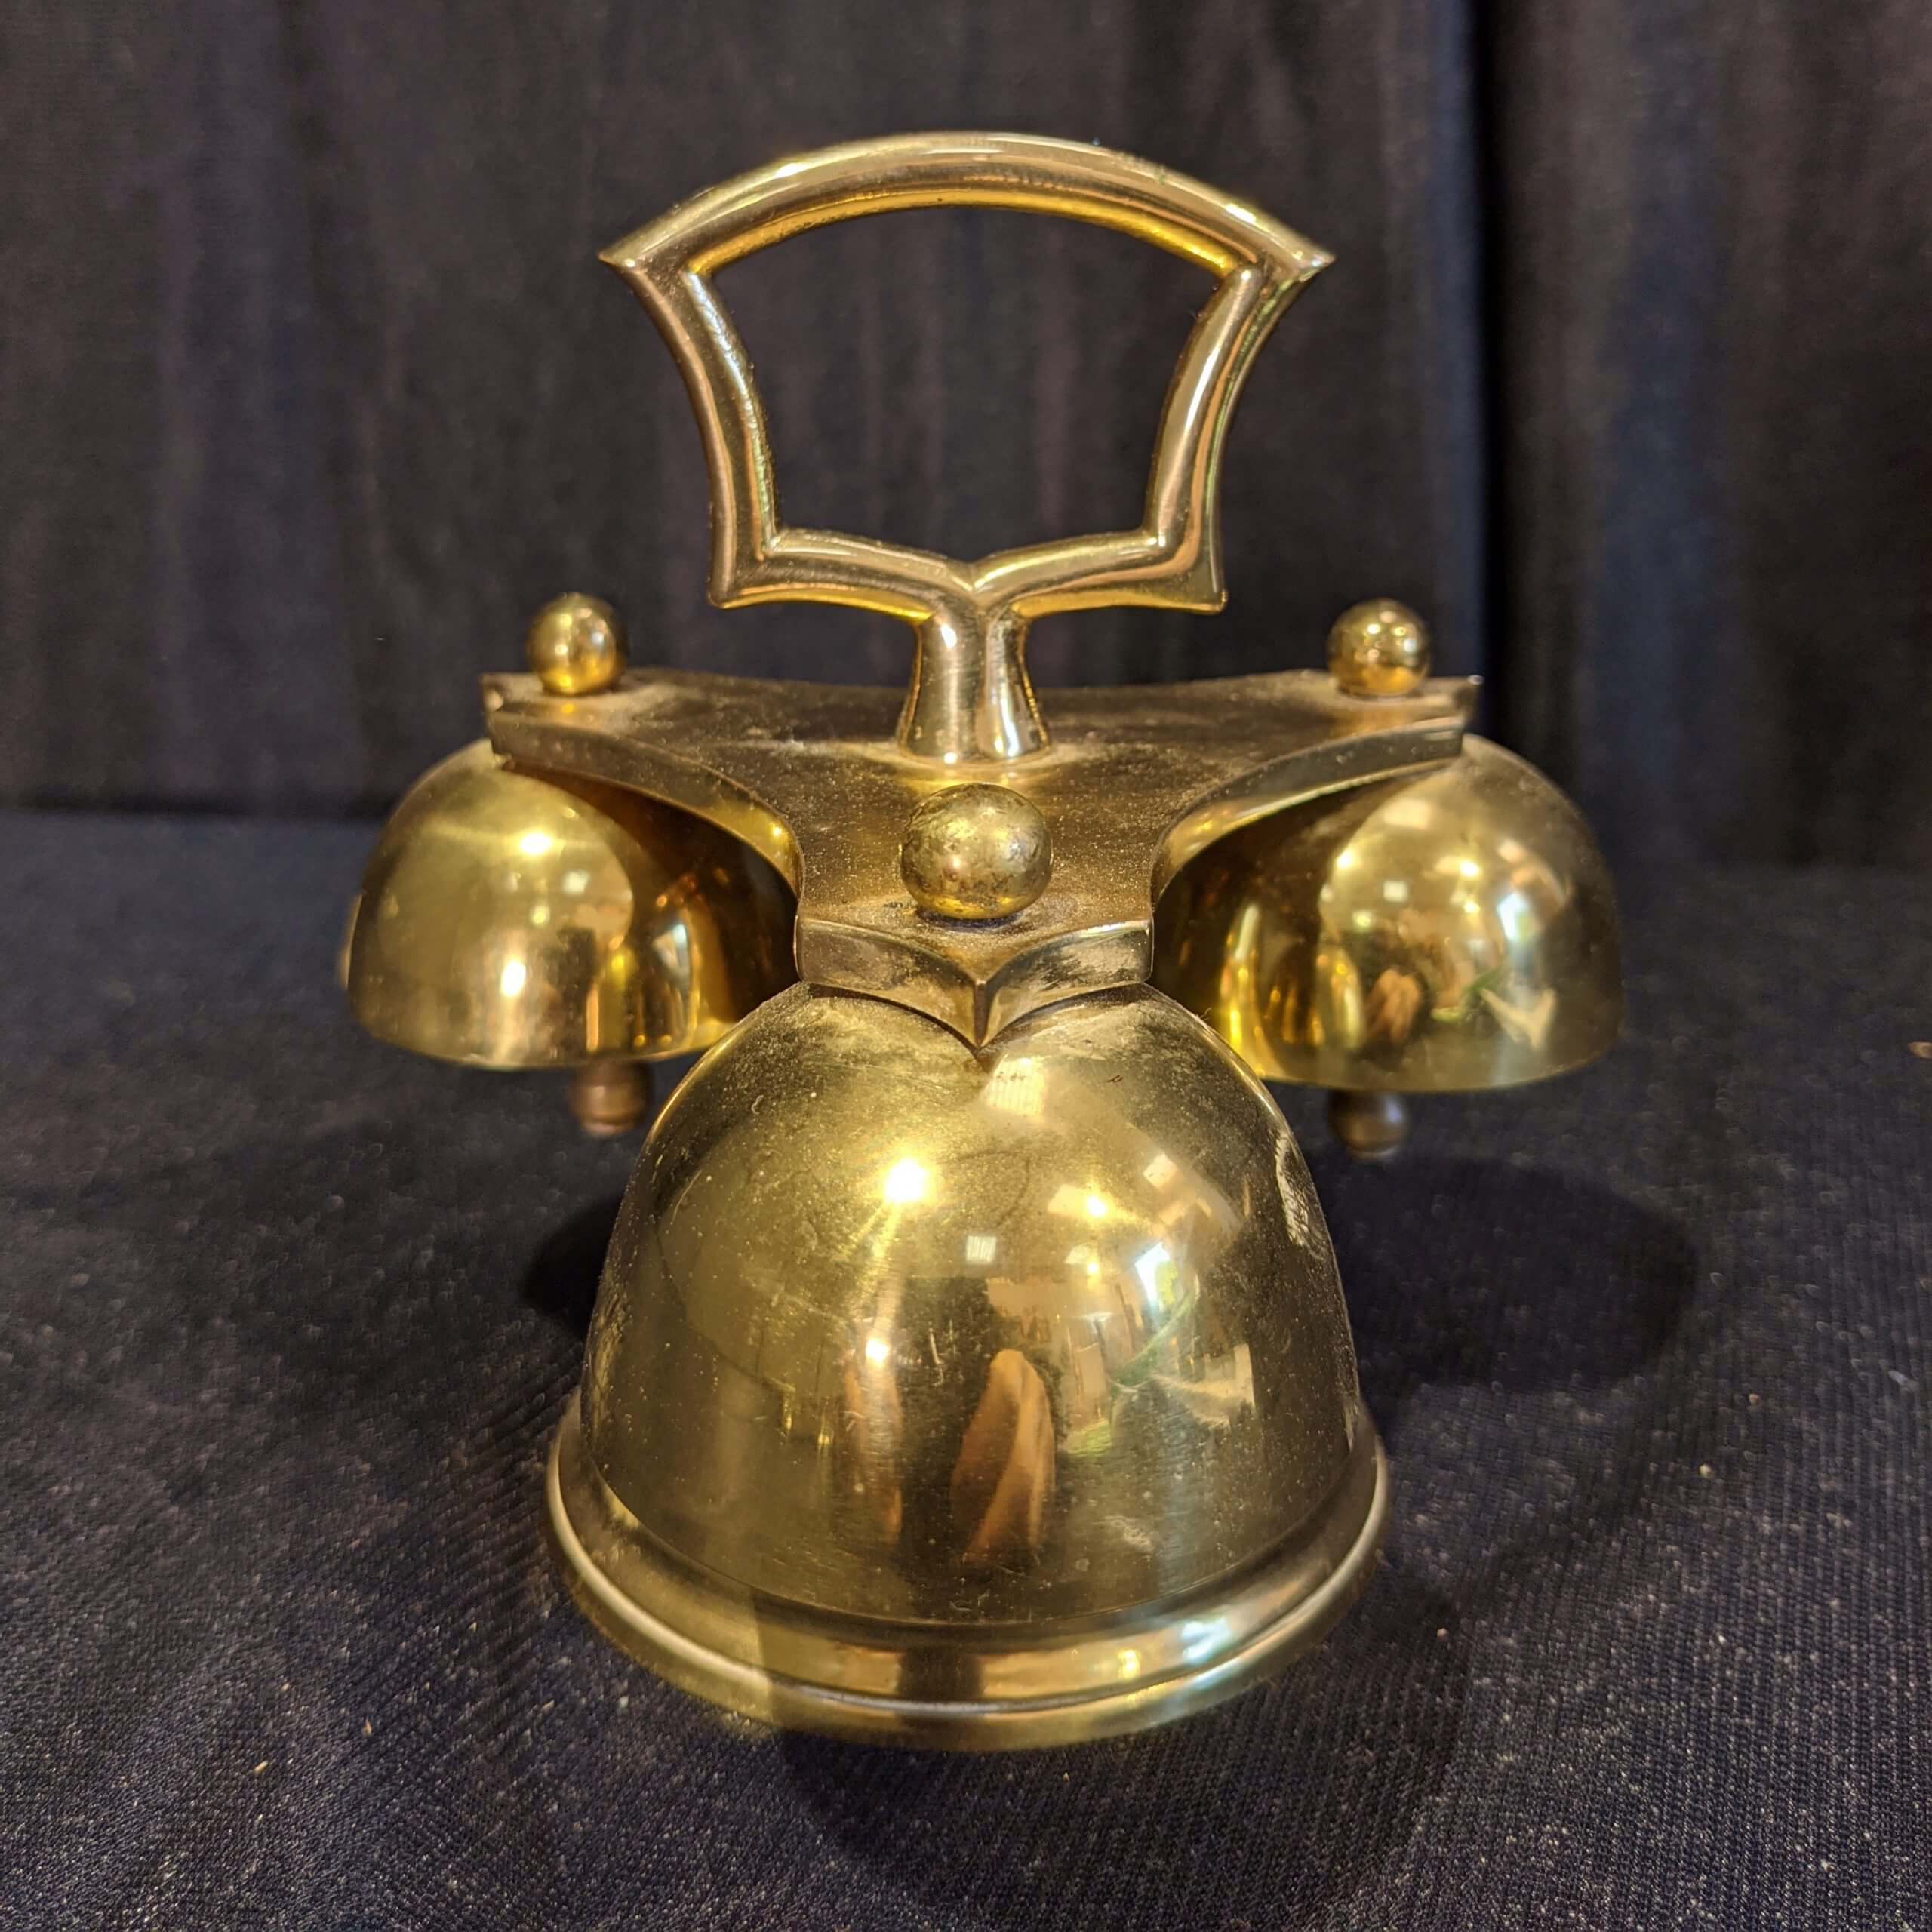 Cone Based Brass Altar Three Bells Sanctus Bell Sacring Chime Set (SOLD) -  Antique Church Furnishings